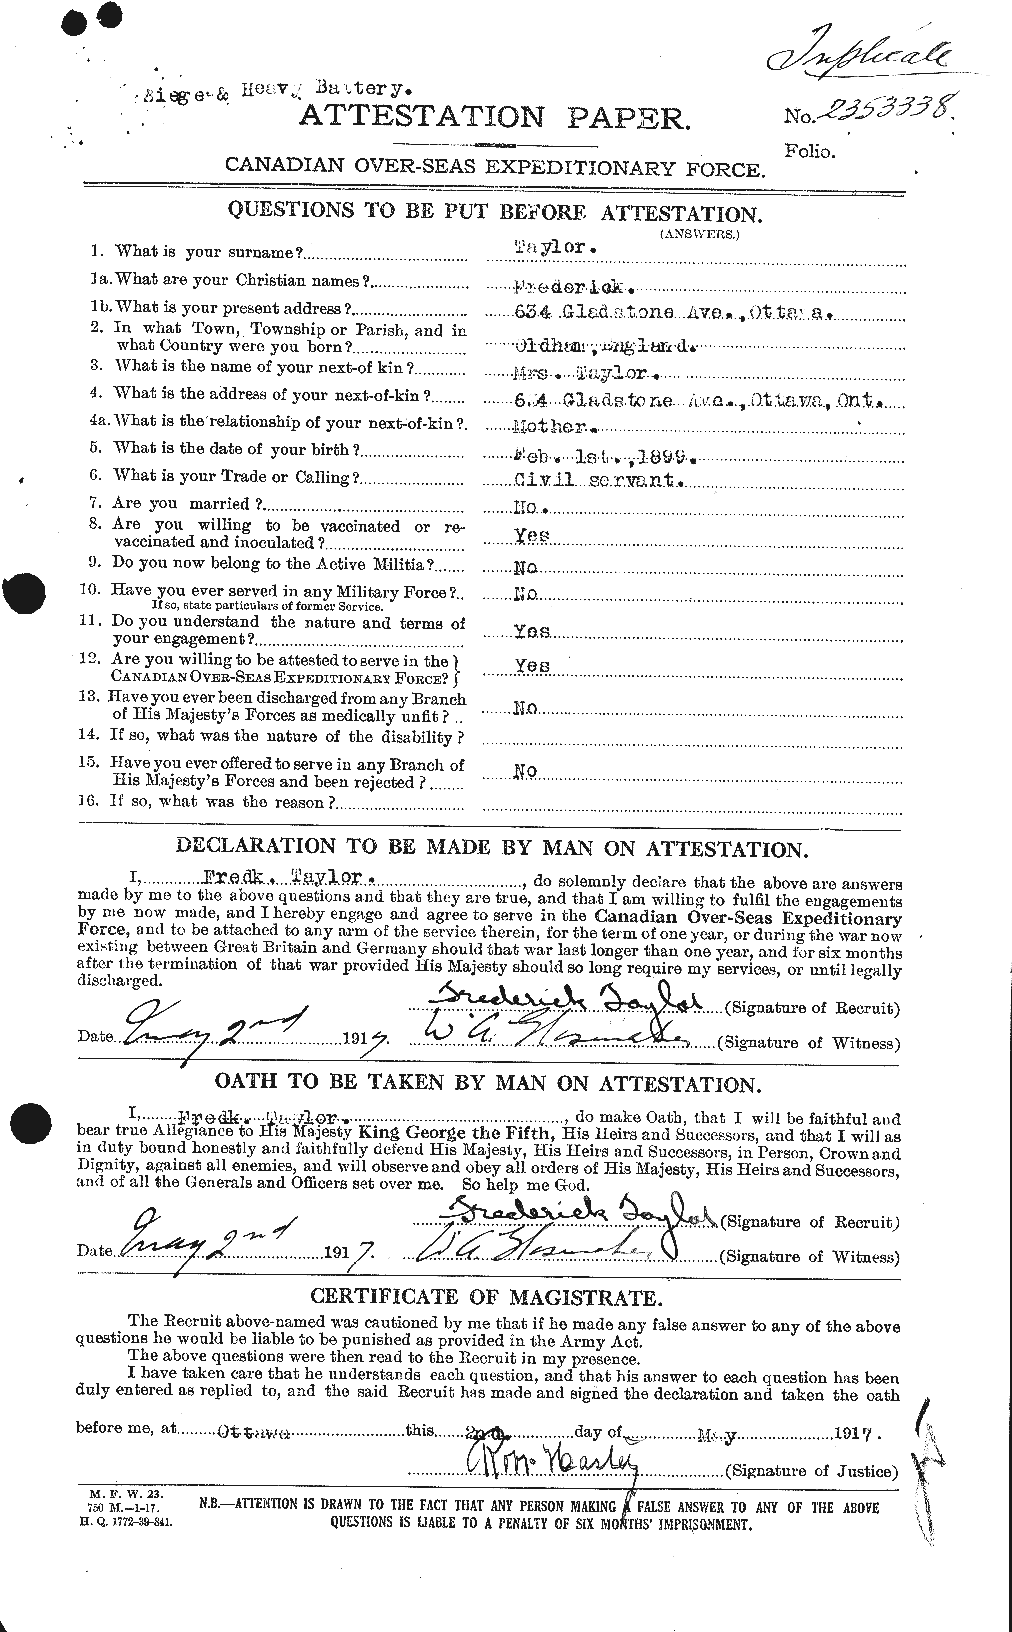 Personnel Records of the First World War - CEF 625774a